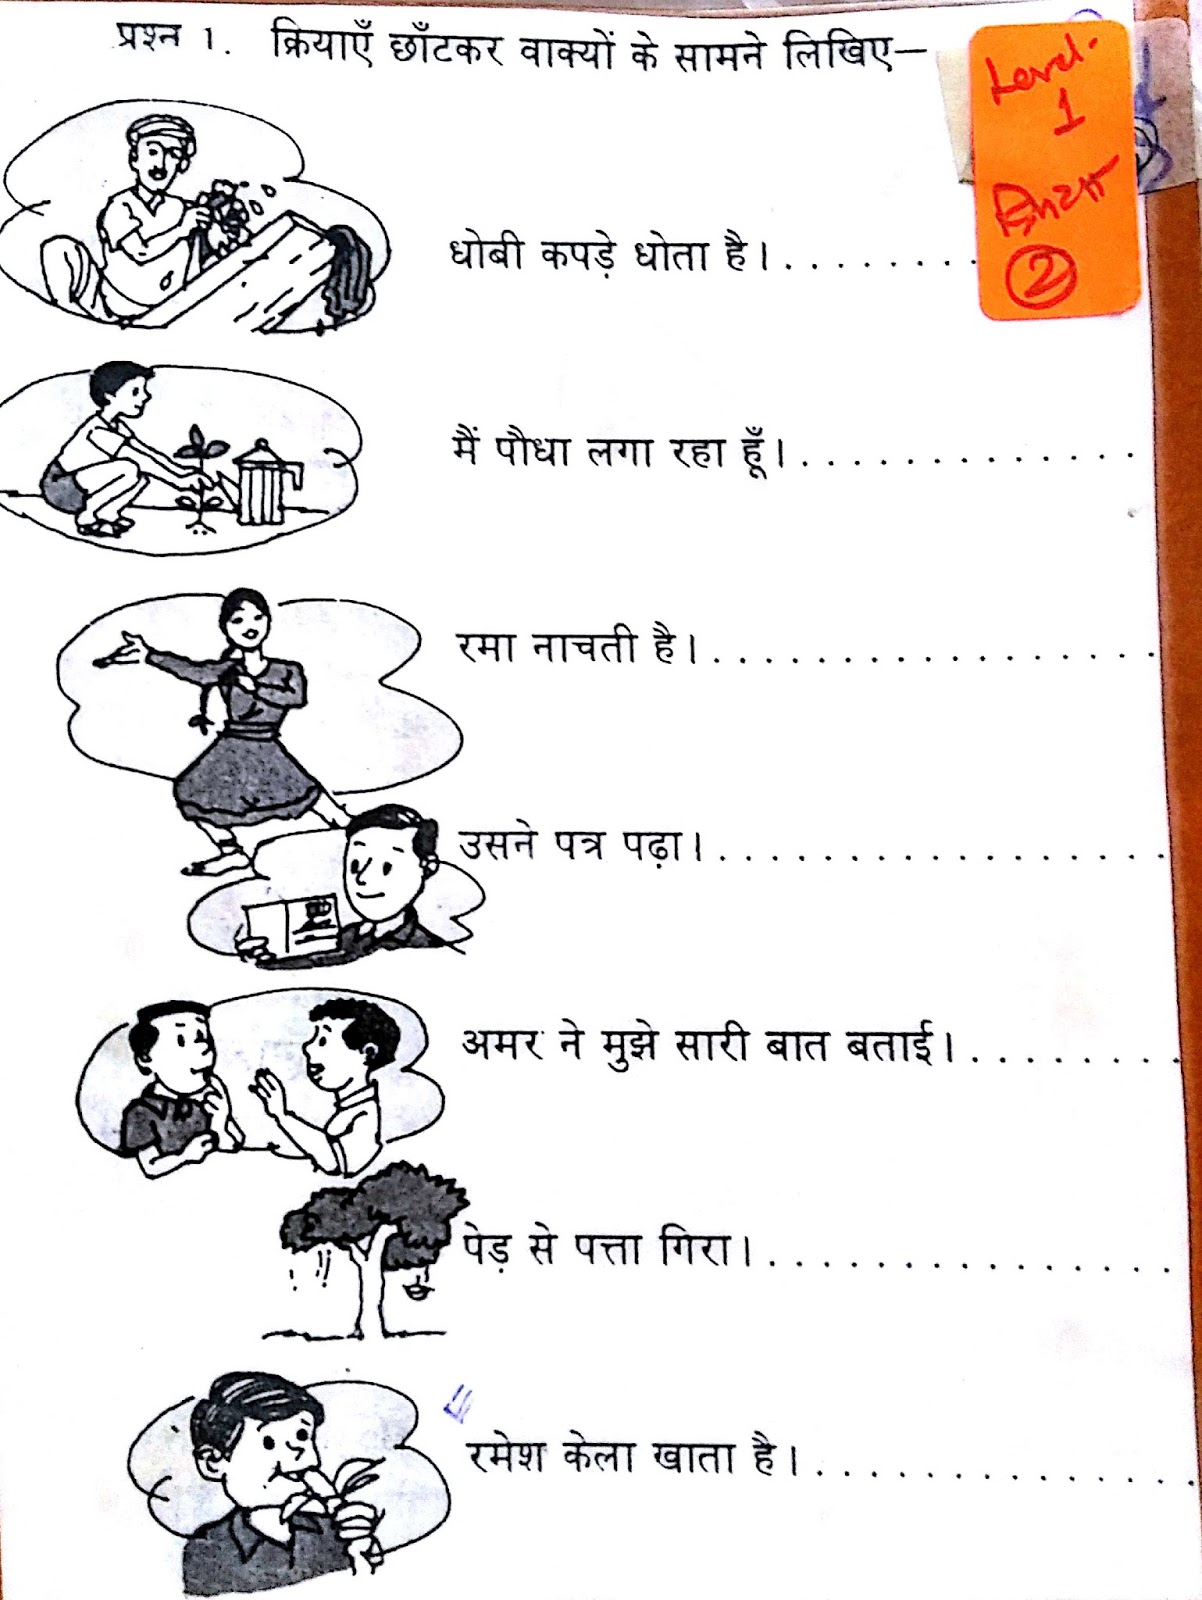 hindi-grammar-work-sheet-collection-for-classes-5-6-7-8-verb-and-its-types-work-sheets-for